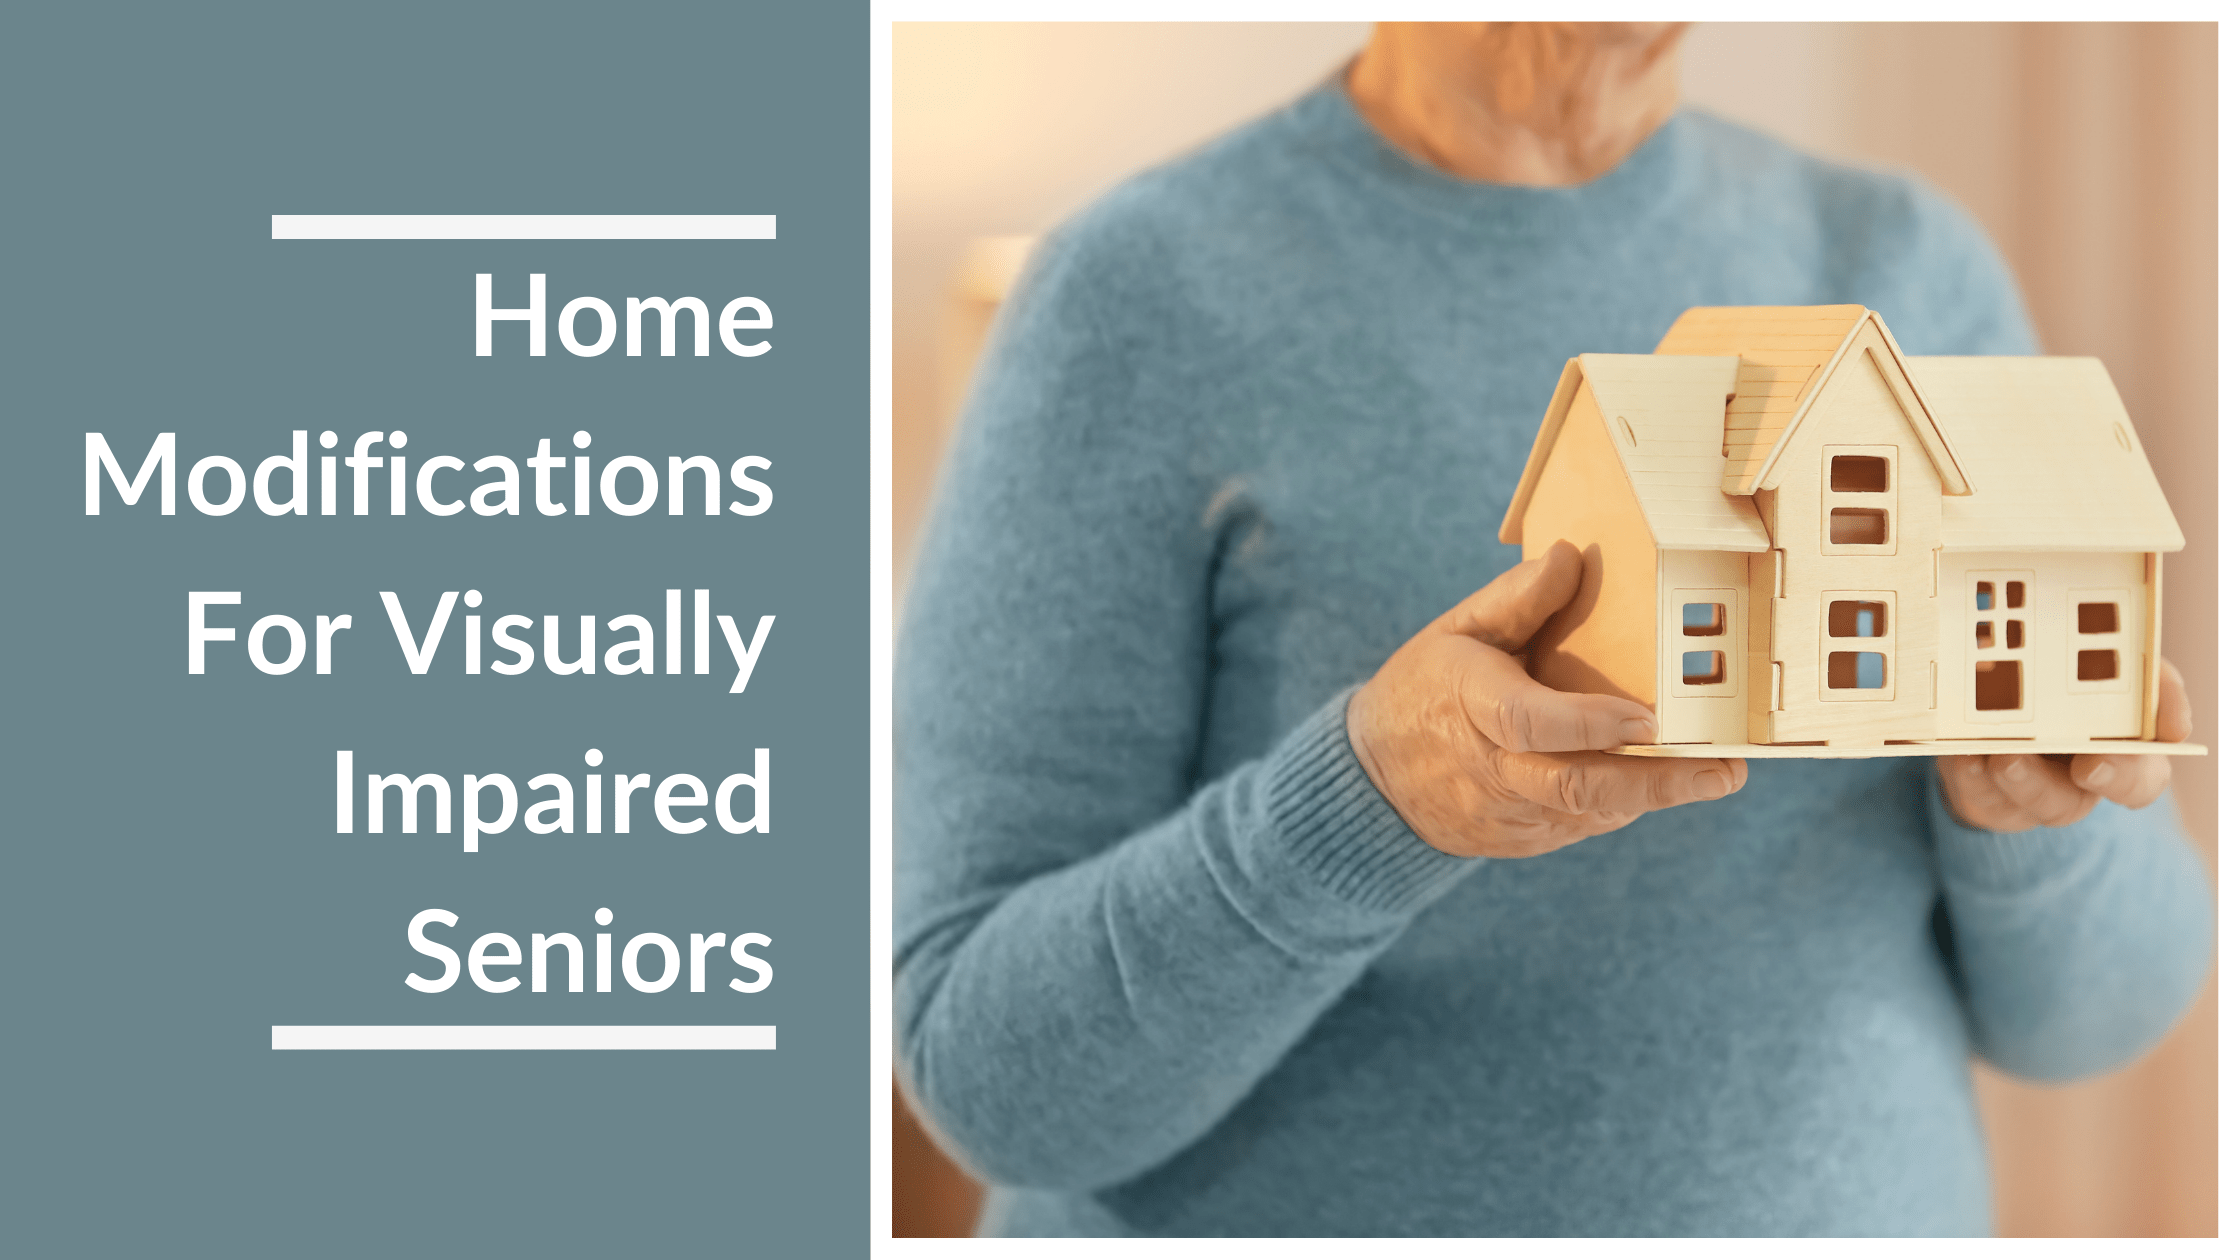 Home Modifications For Visually Impaired Seniors Featured Image